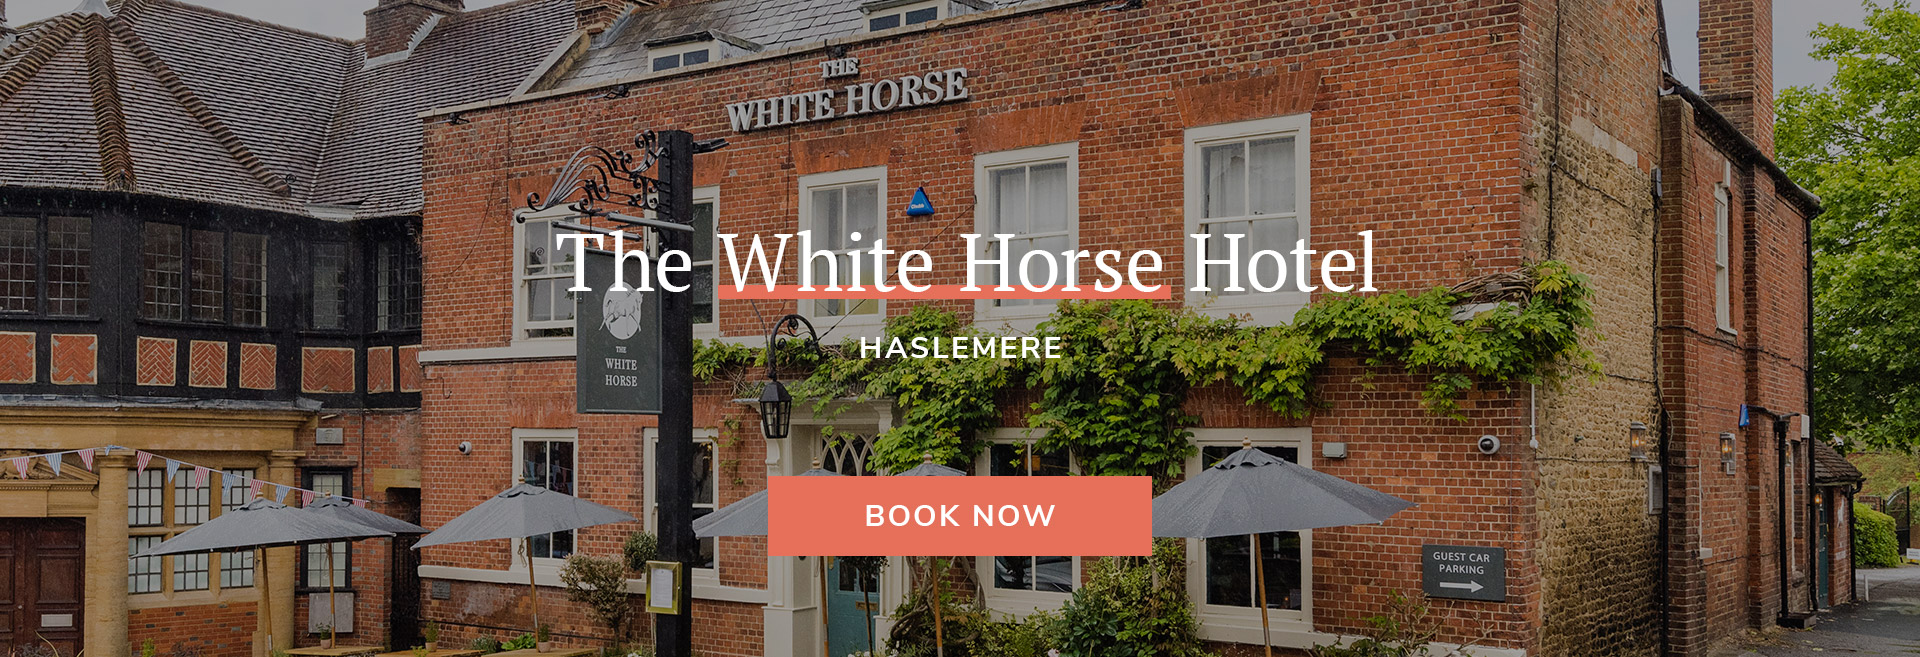 The White Horse Hotel Banner 1